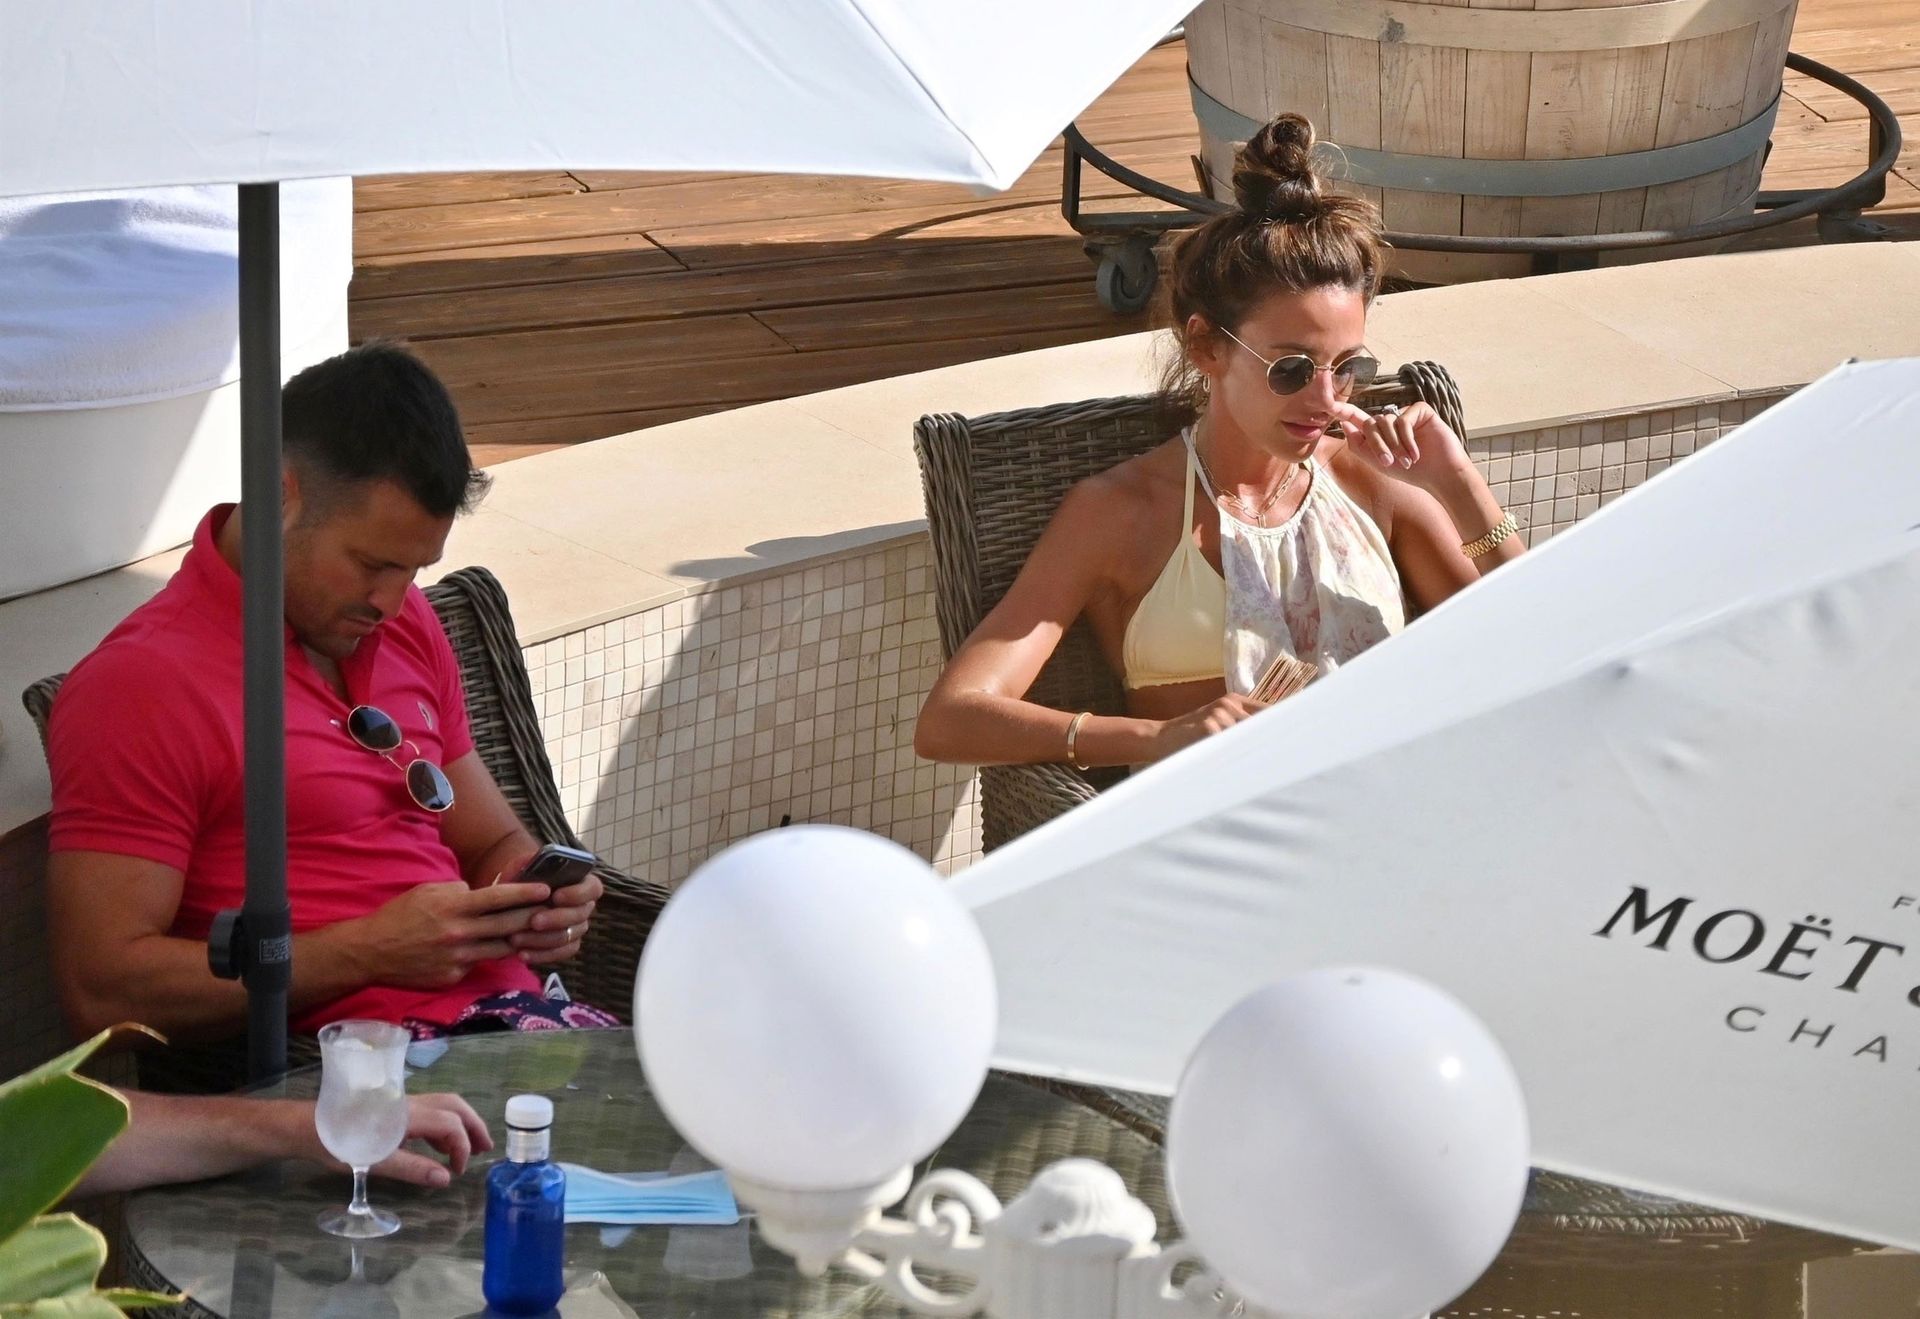 Michelle Keegan & Mark Wright Have Some Holid
ay Fun in Marbella (52 Photos)